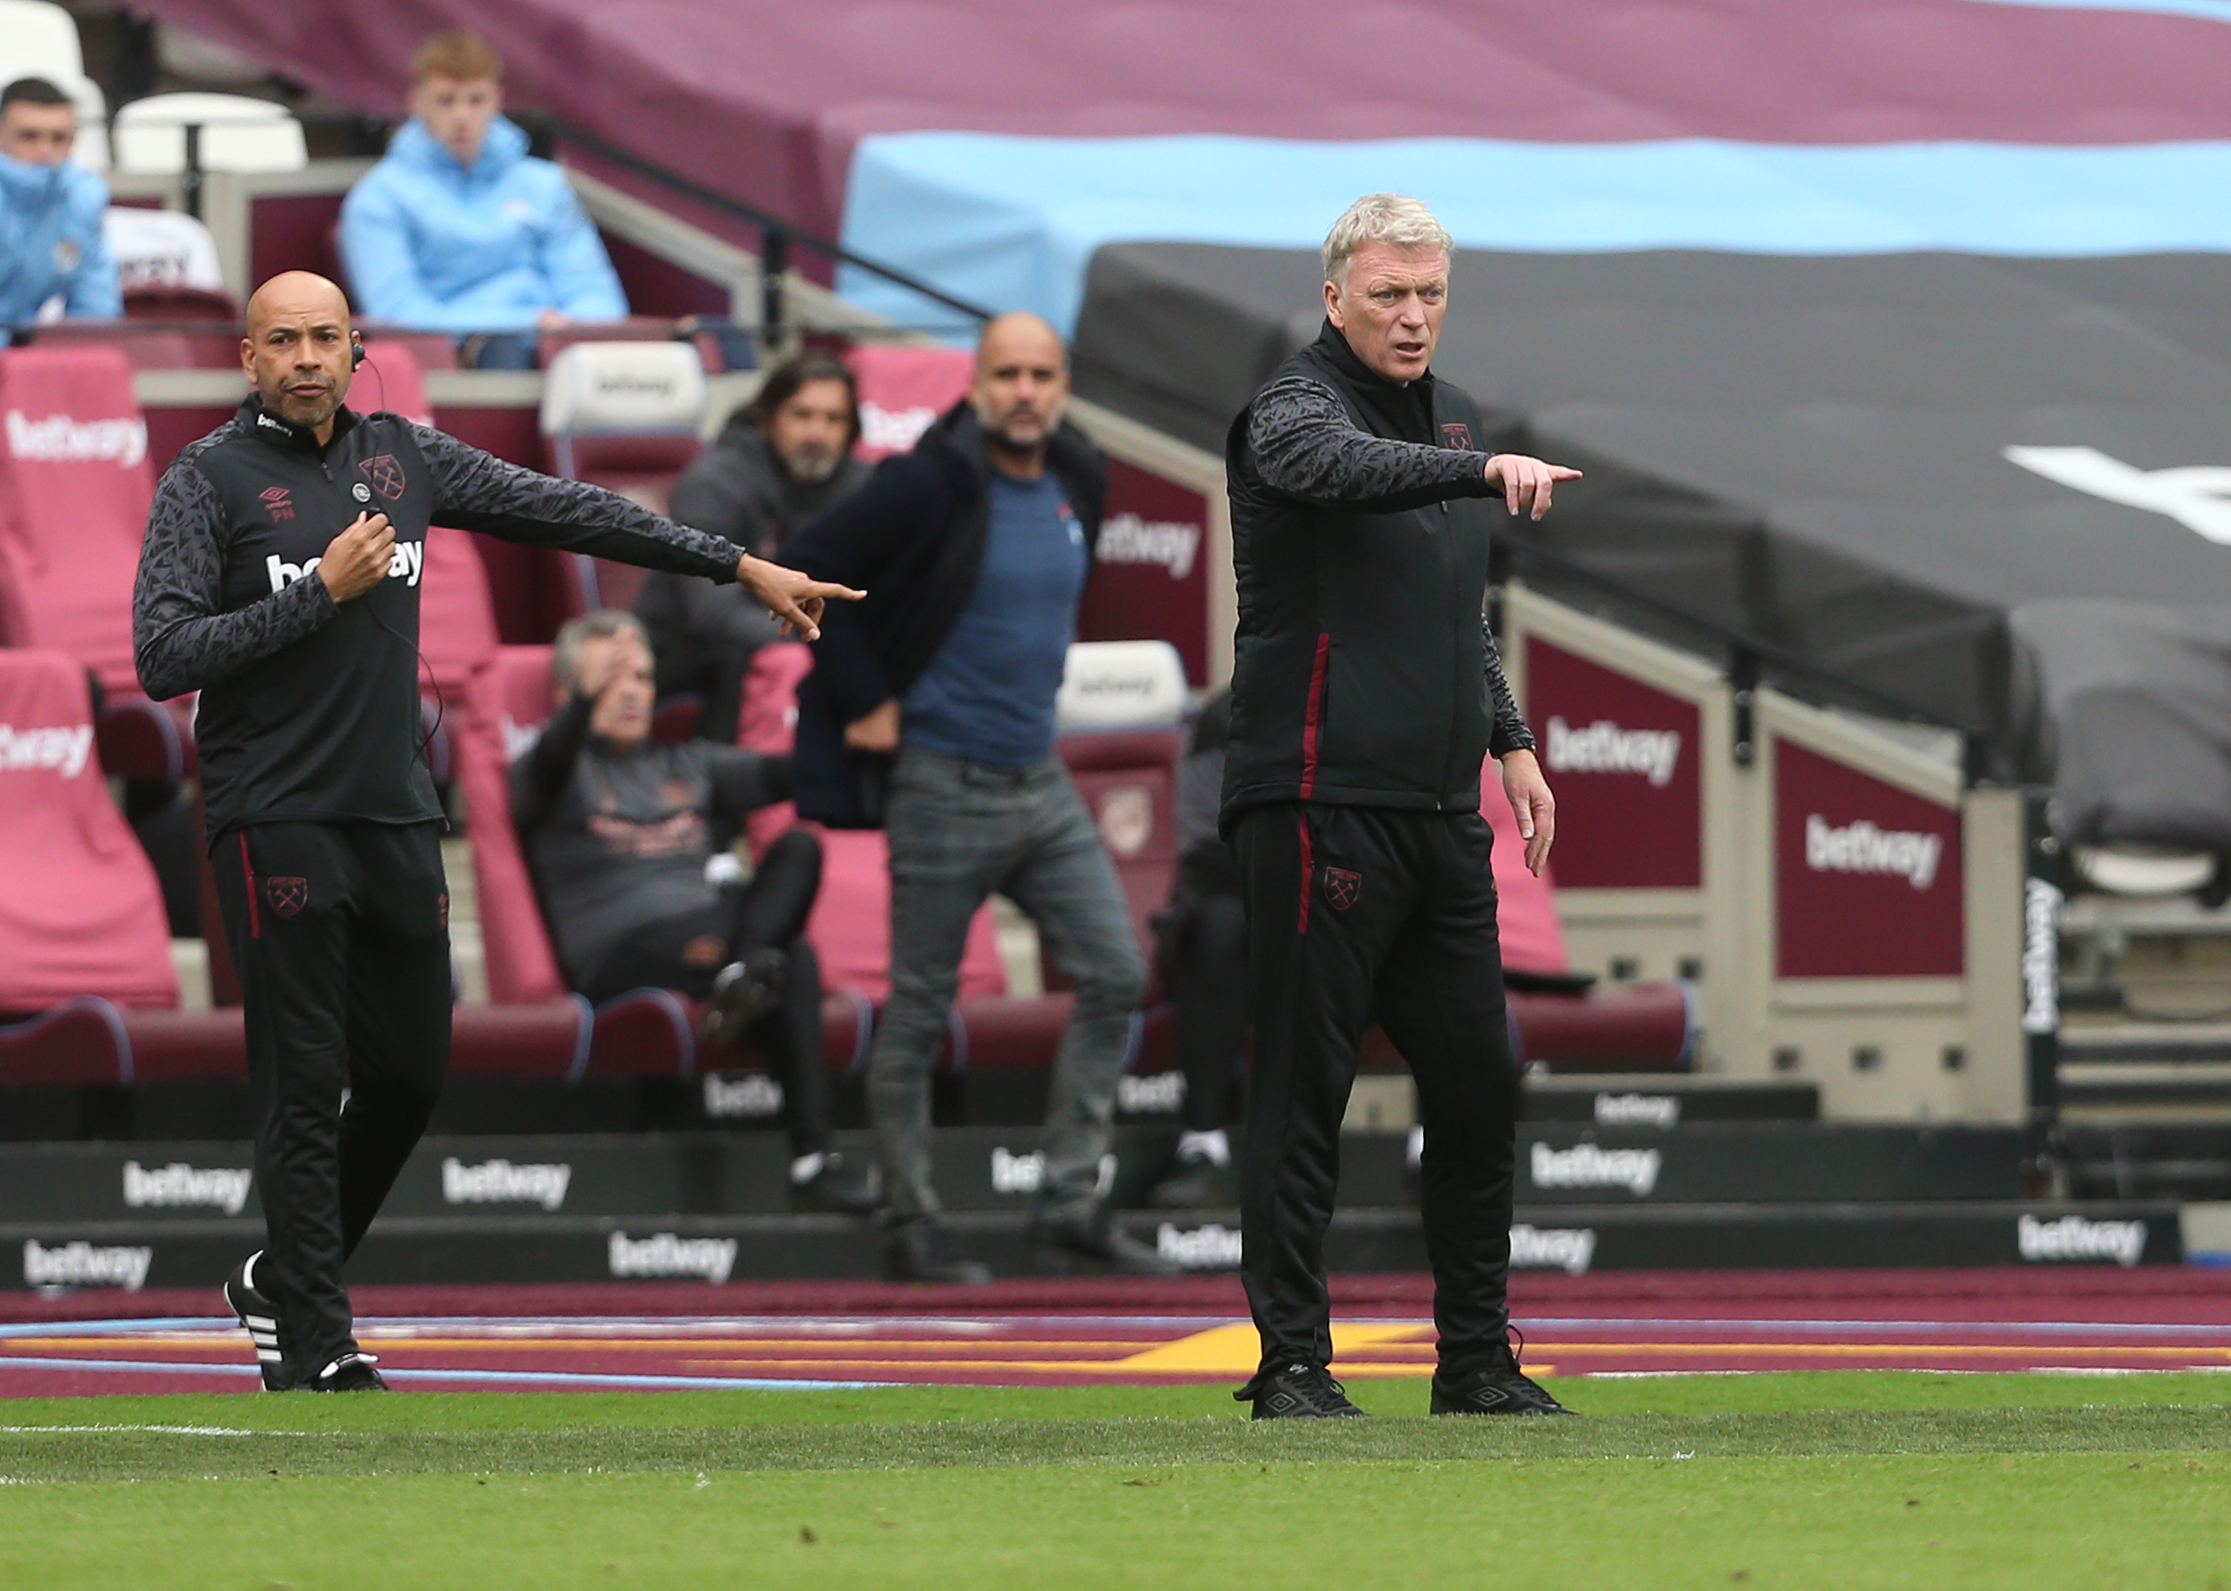 Opinion: David Moyes deserves new West Ham deal after excellent start to season